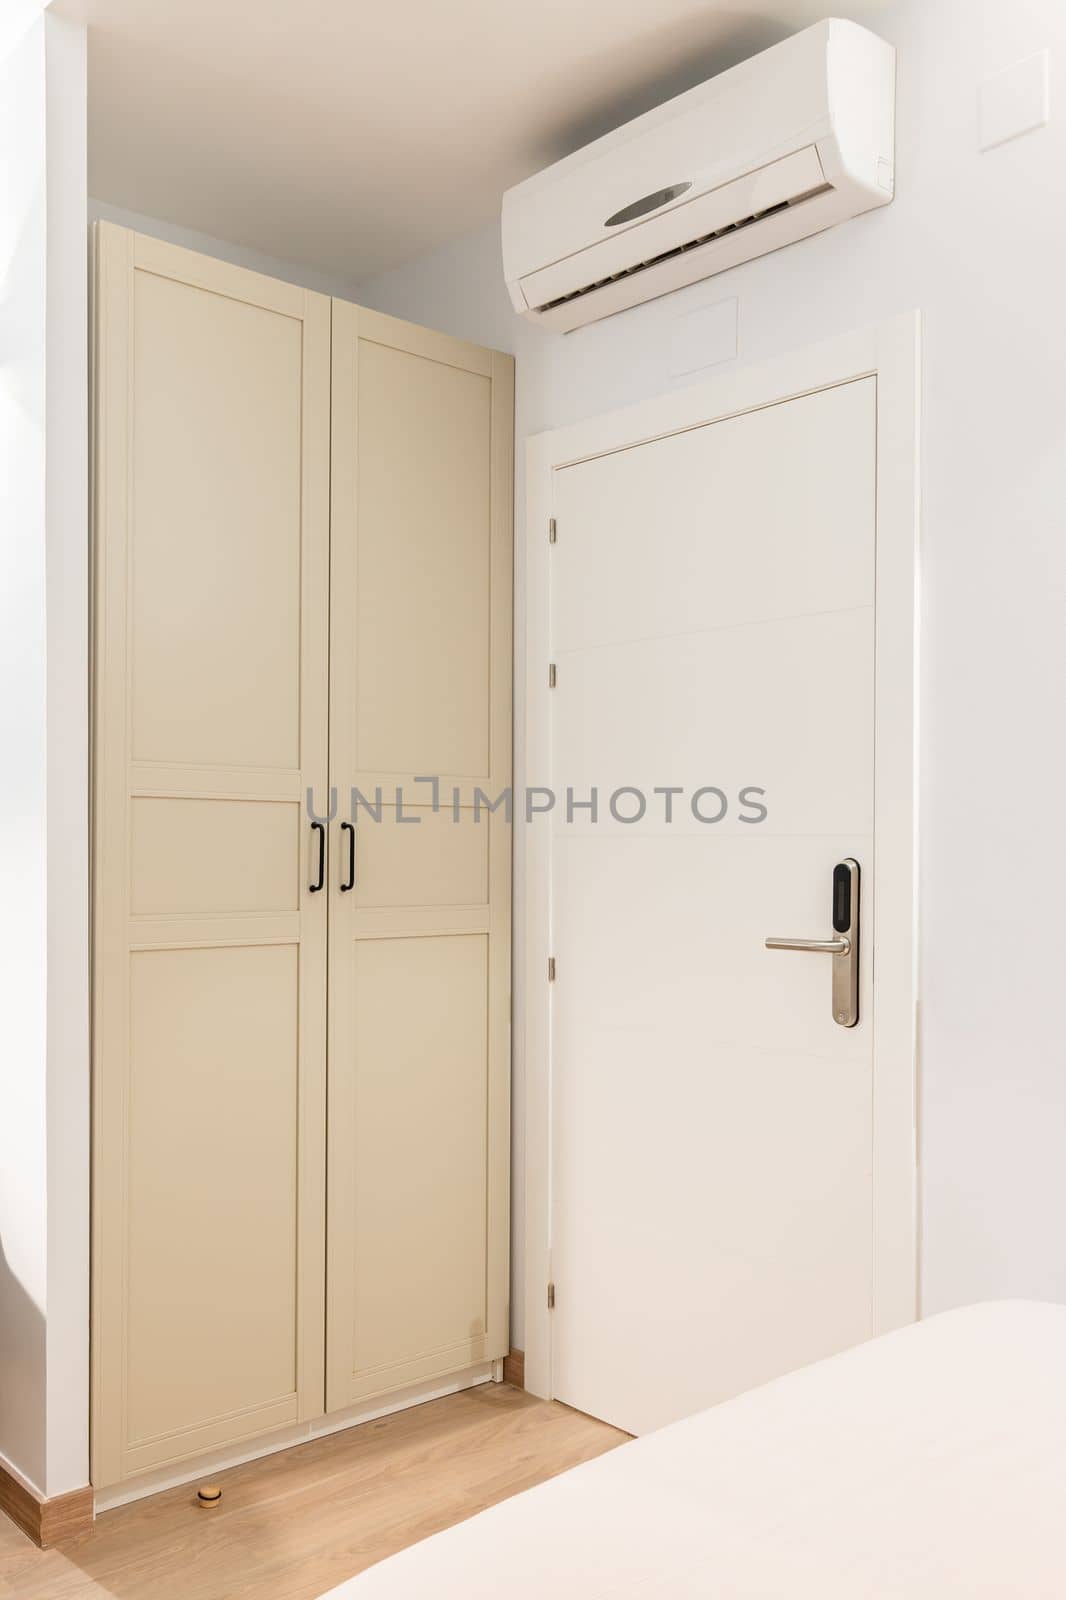 Closeup of a white wooden front door to a room next to a wardrobe. Wardrobe doors are painted beige and closed from prying eyes. Air conditioning above the door for pleasant coolness on hot nights